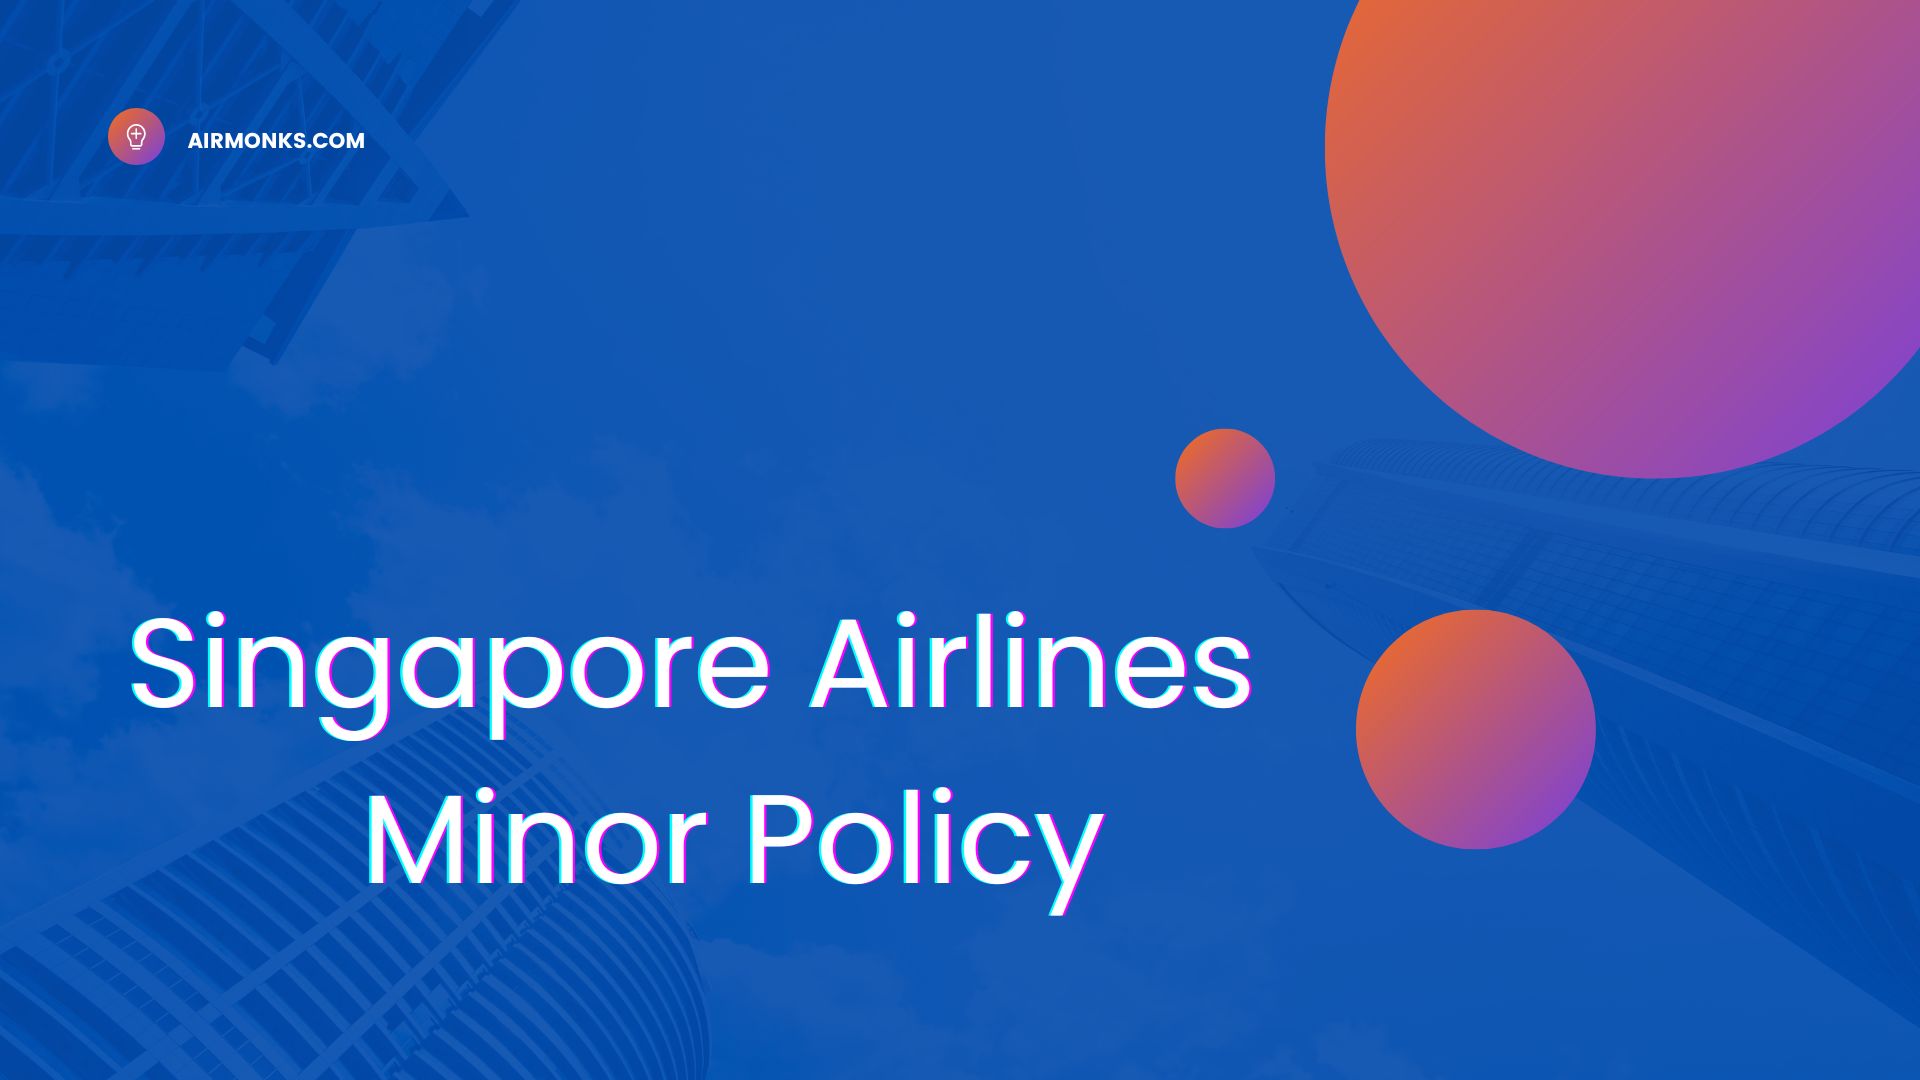 Singapore Airlines Minor Policy63fef52c030e2.jpg